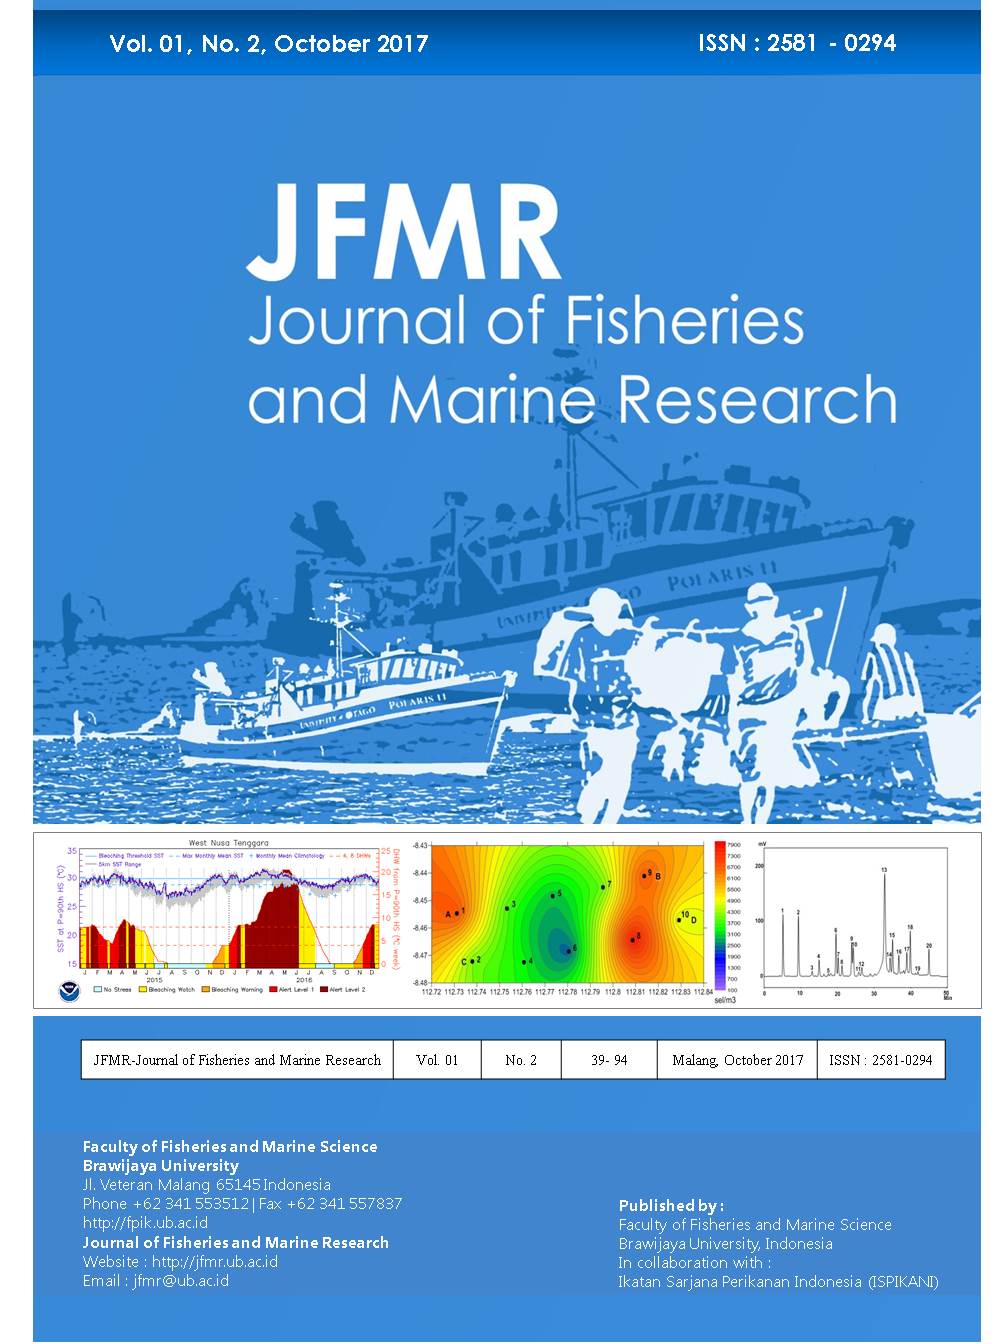 Journal of Fisheries and Marine Research